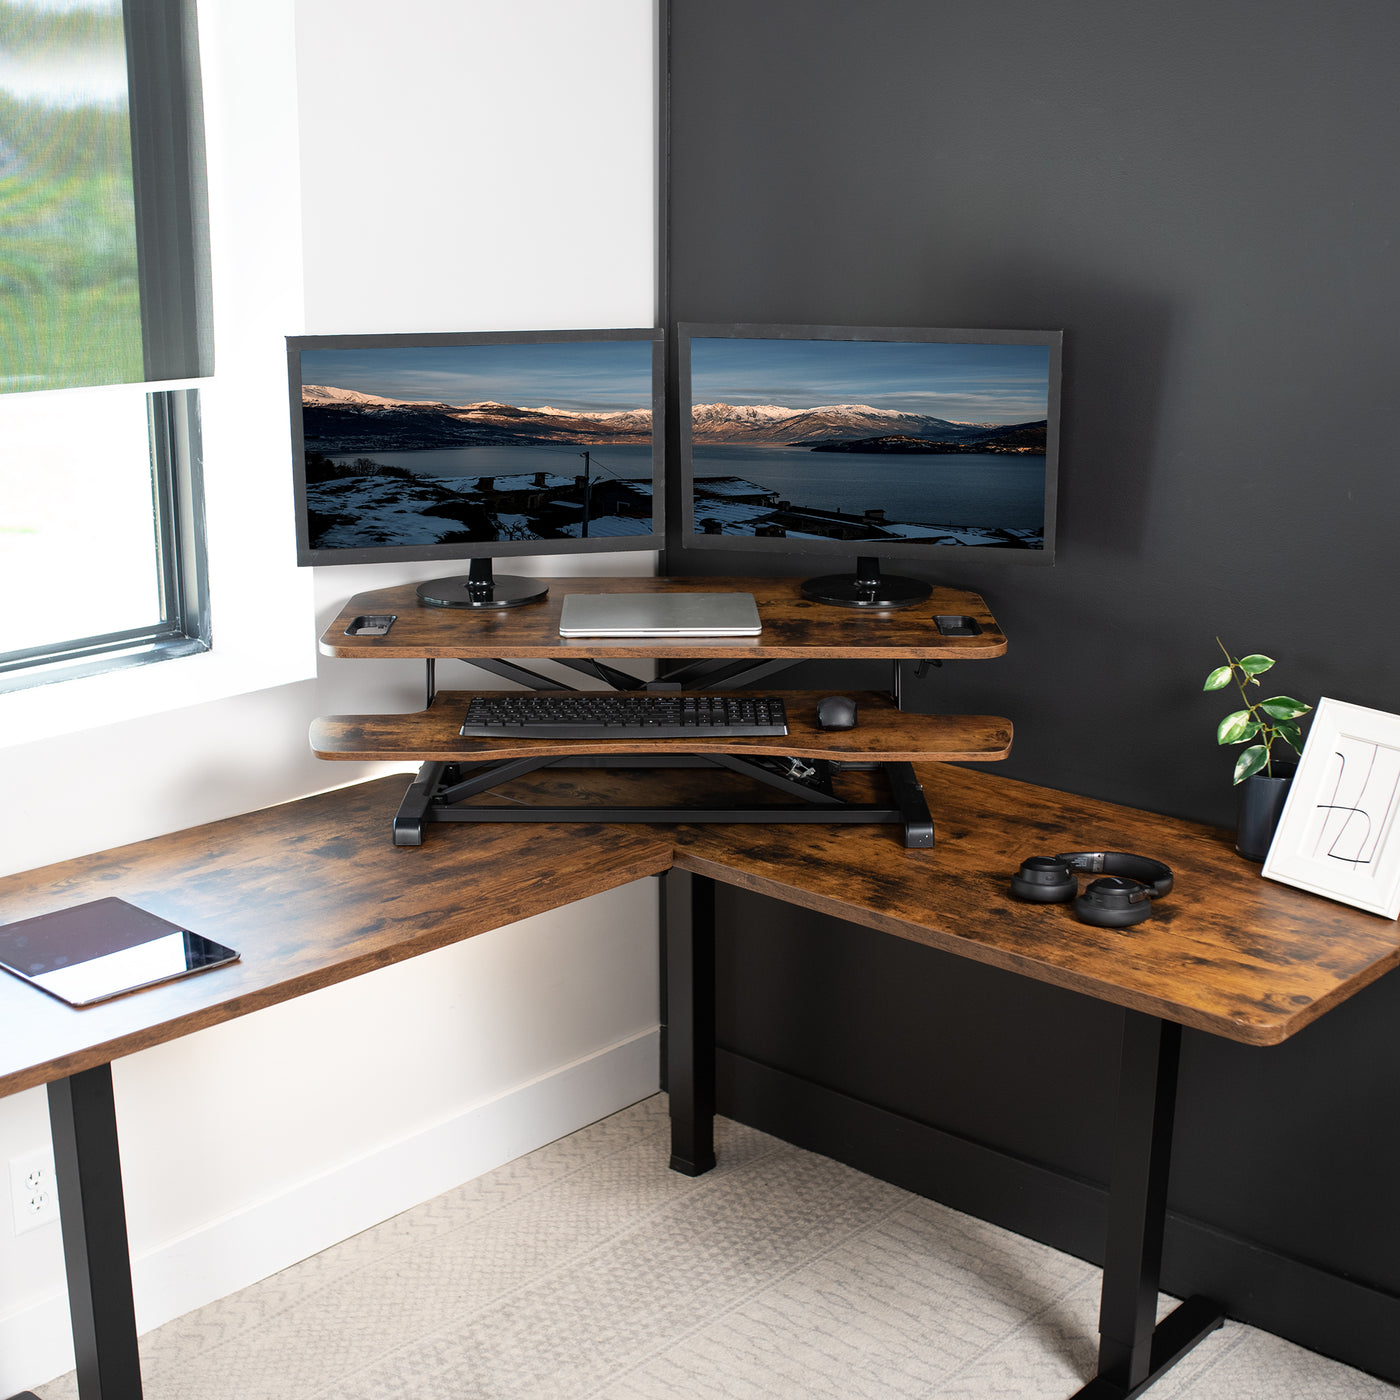 Heavy-duty, rustic, height adjustable desk converter monitor riser with 2 tiers.